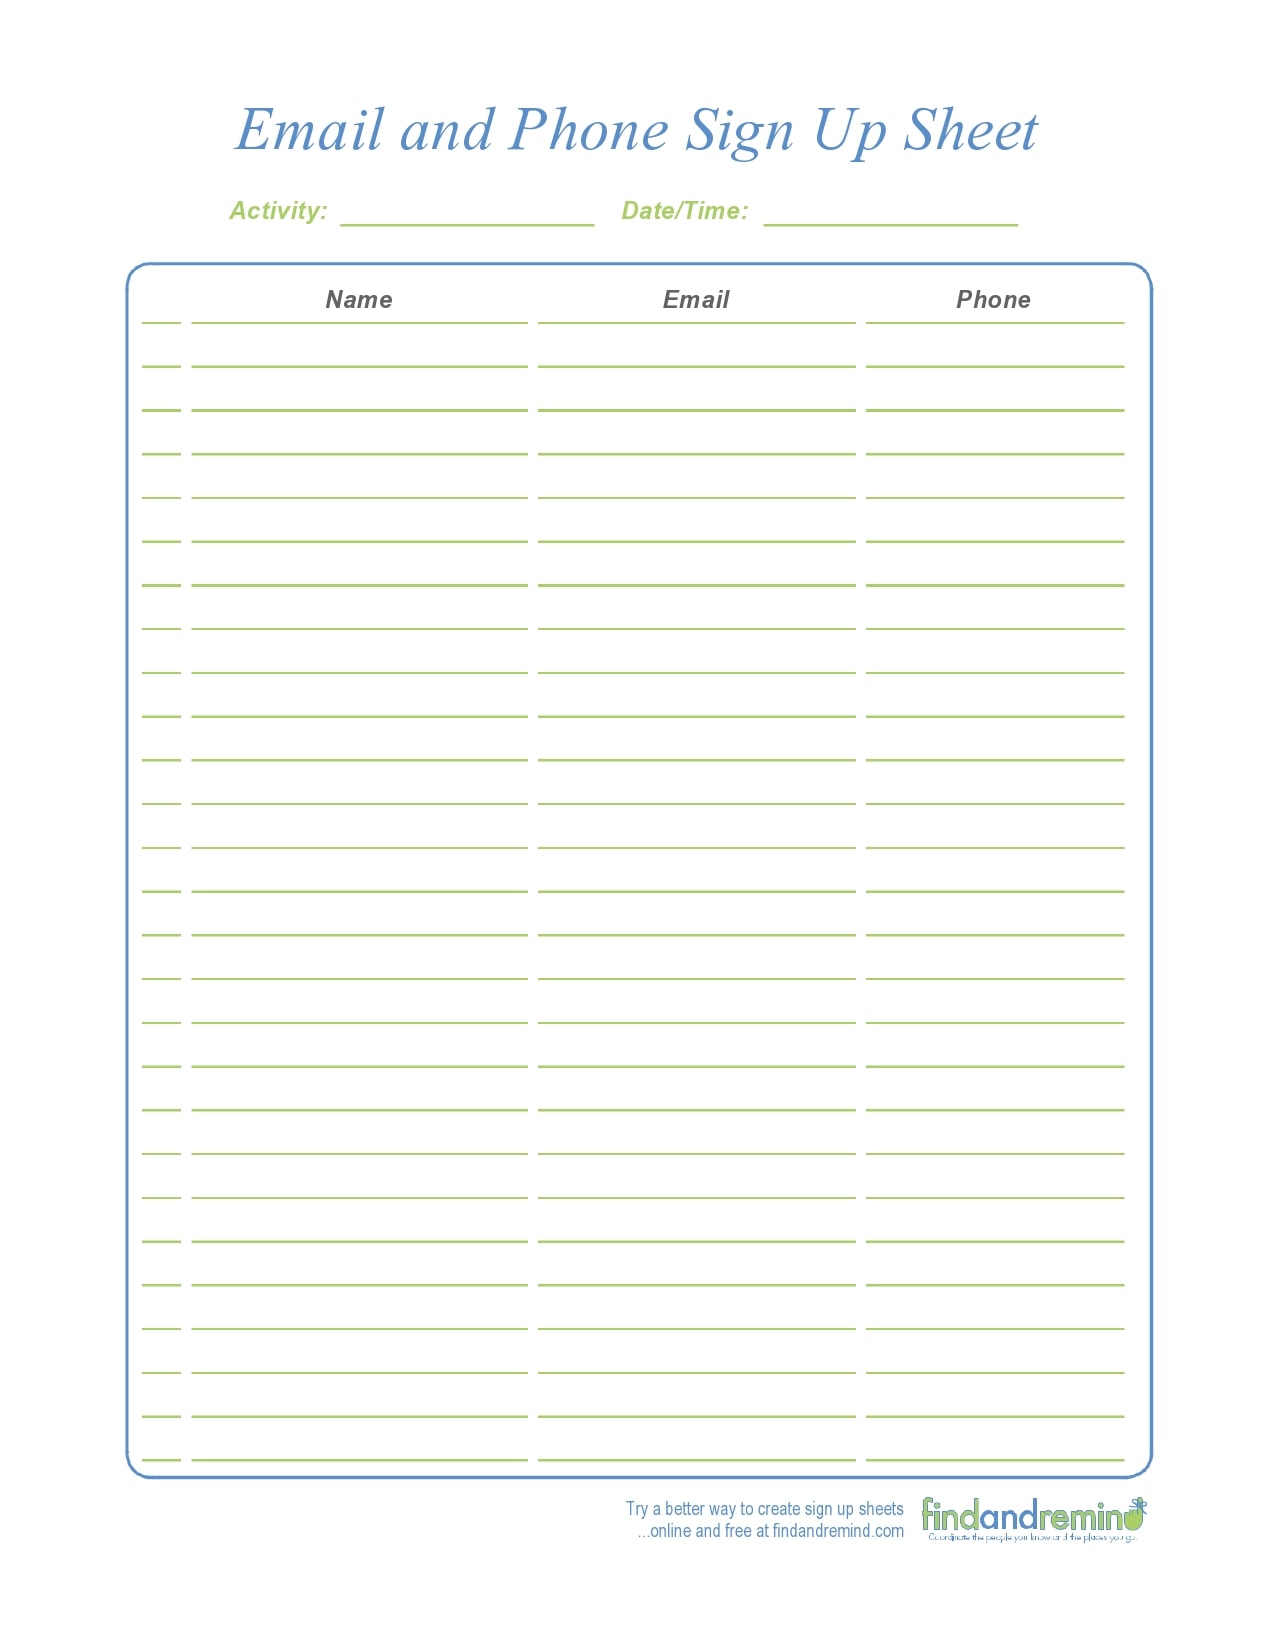 30 Best Email Sign Up Sheet Templates (Word/Excel)